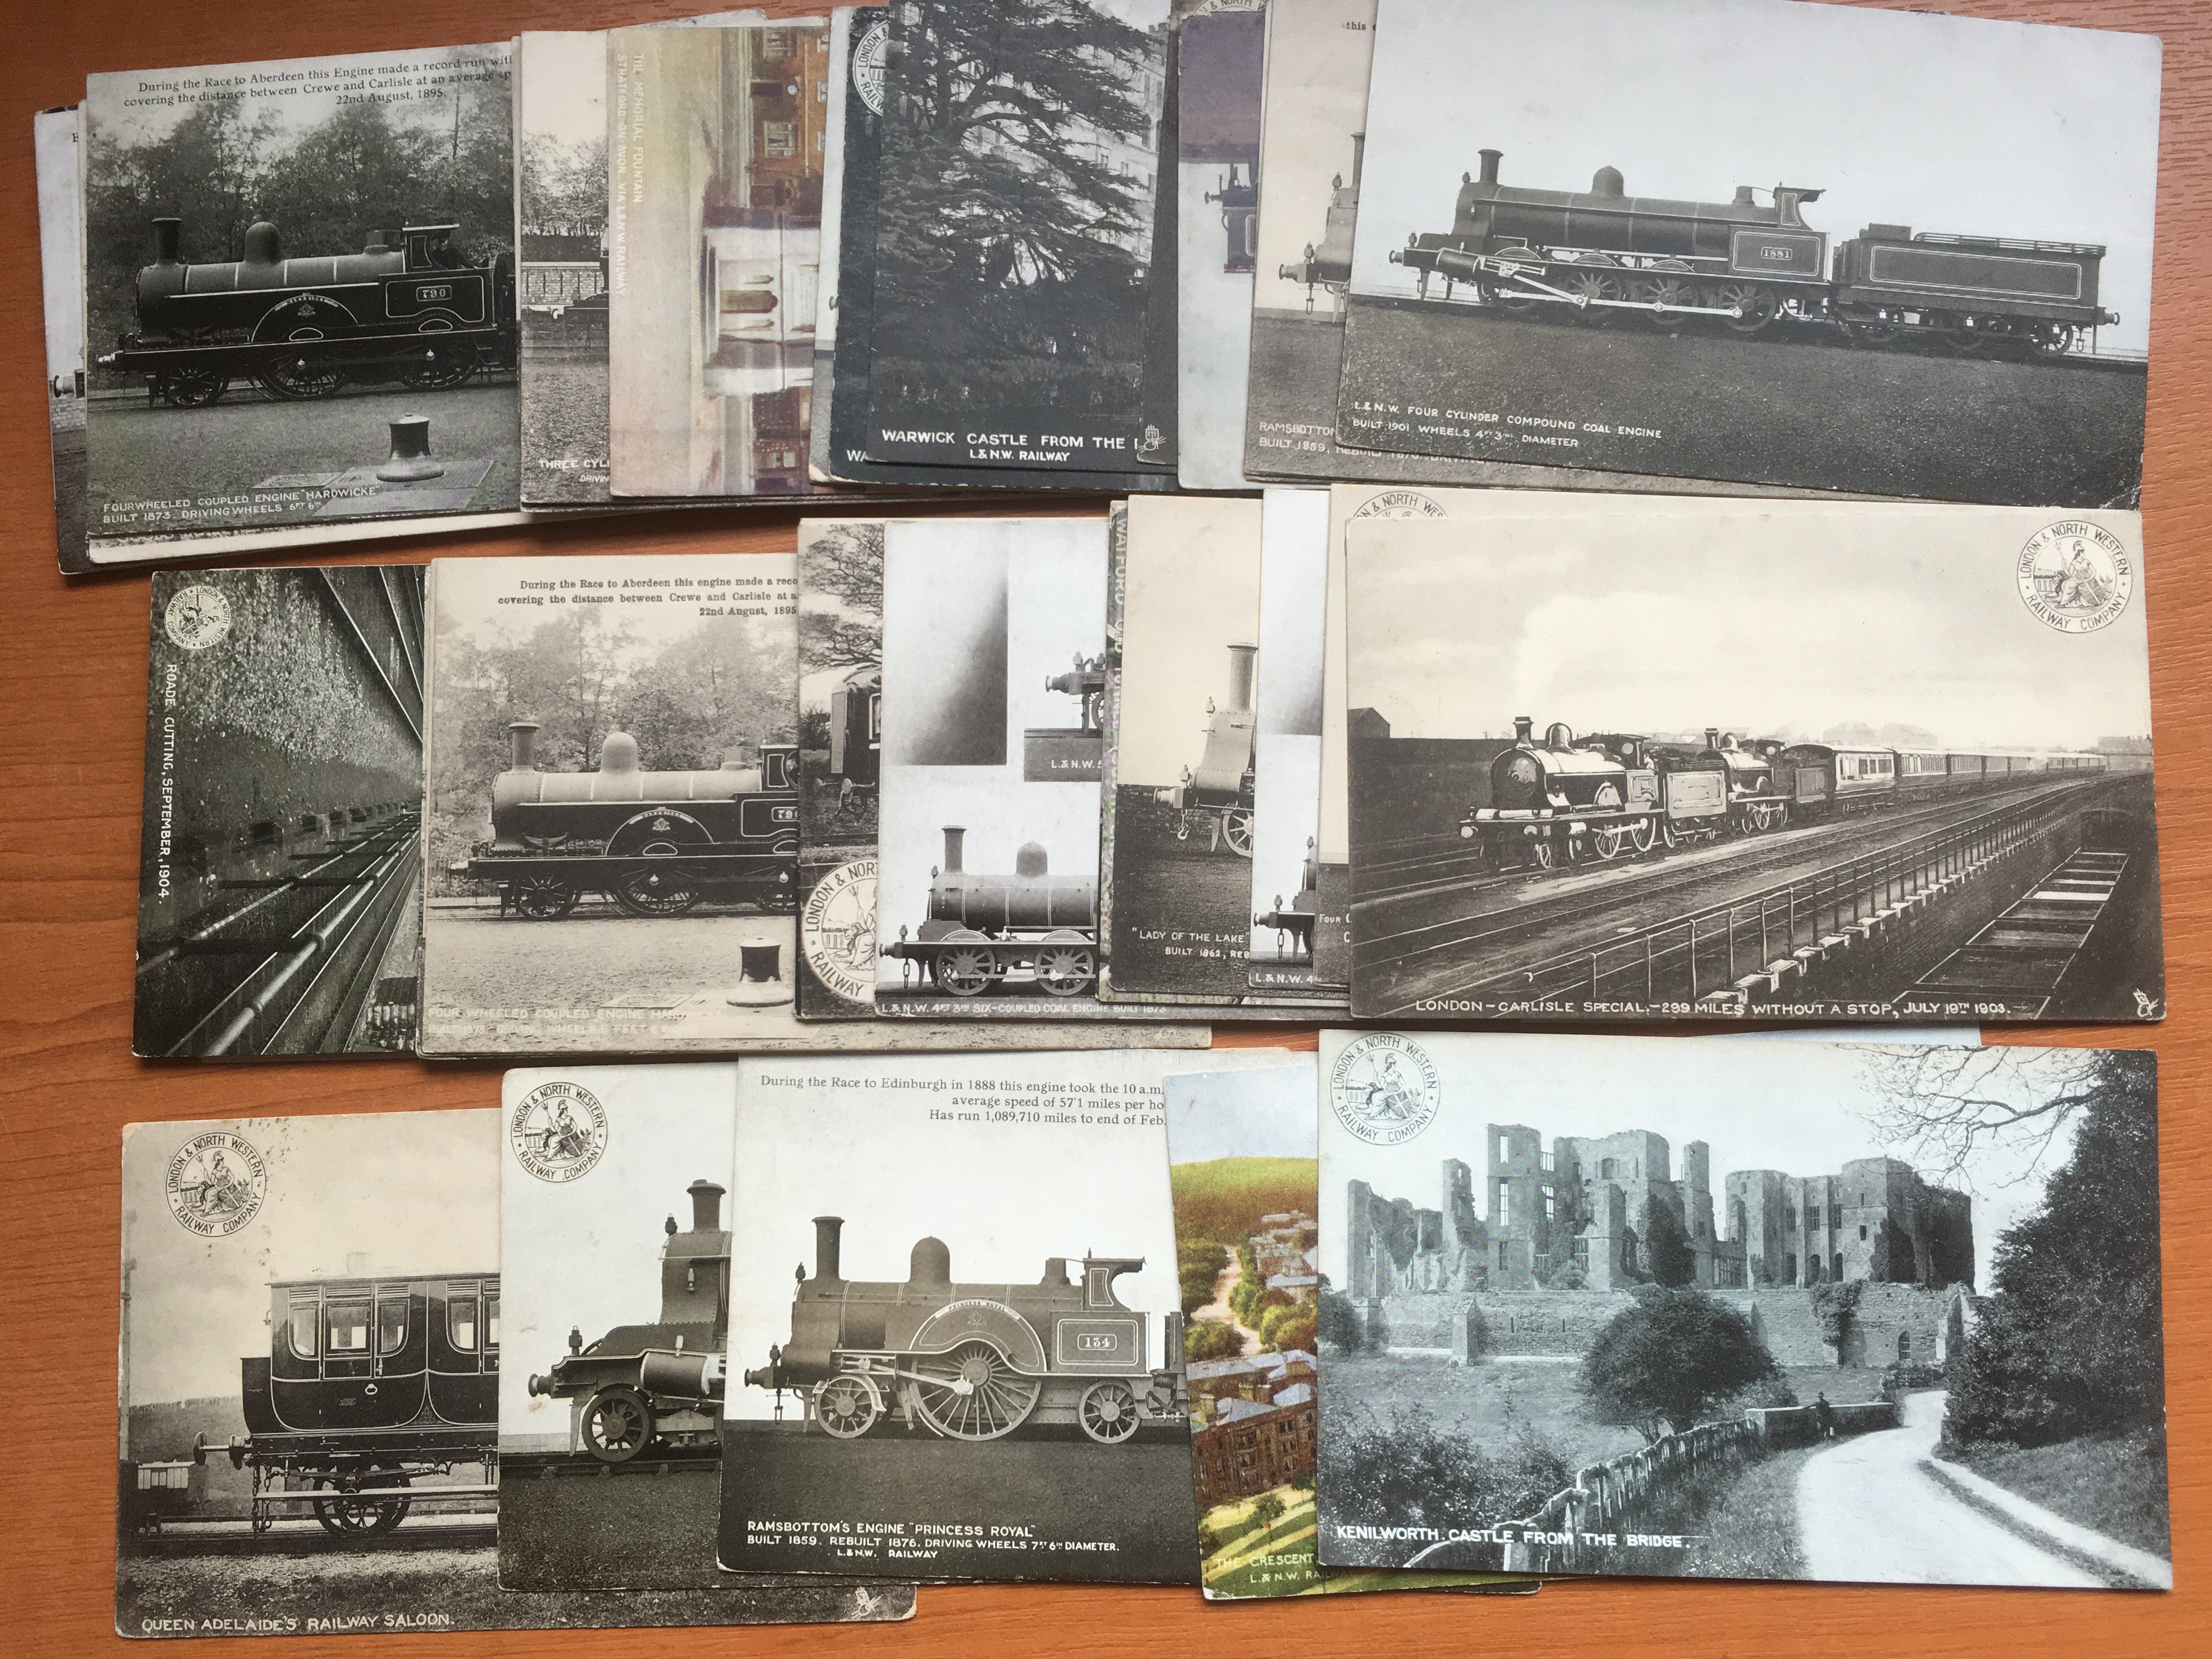 BOX OF MIXED POSTCARDS, BIRDS, LNWR RAILWAY OFFICIALS, 1951 FESTIVAL OF BRITAIN UK VIEWS, HOSPITALS, - Image 2 of 4